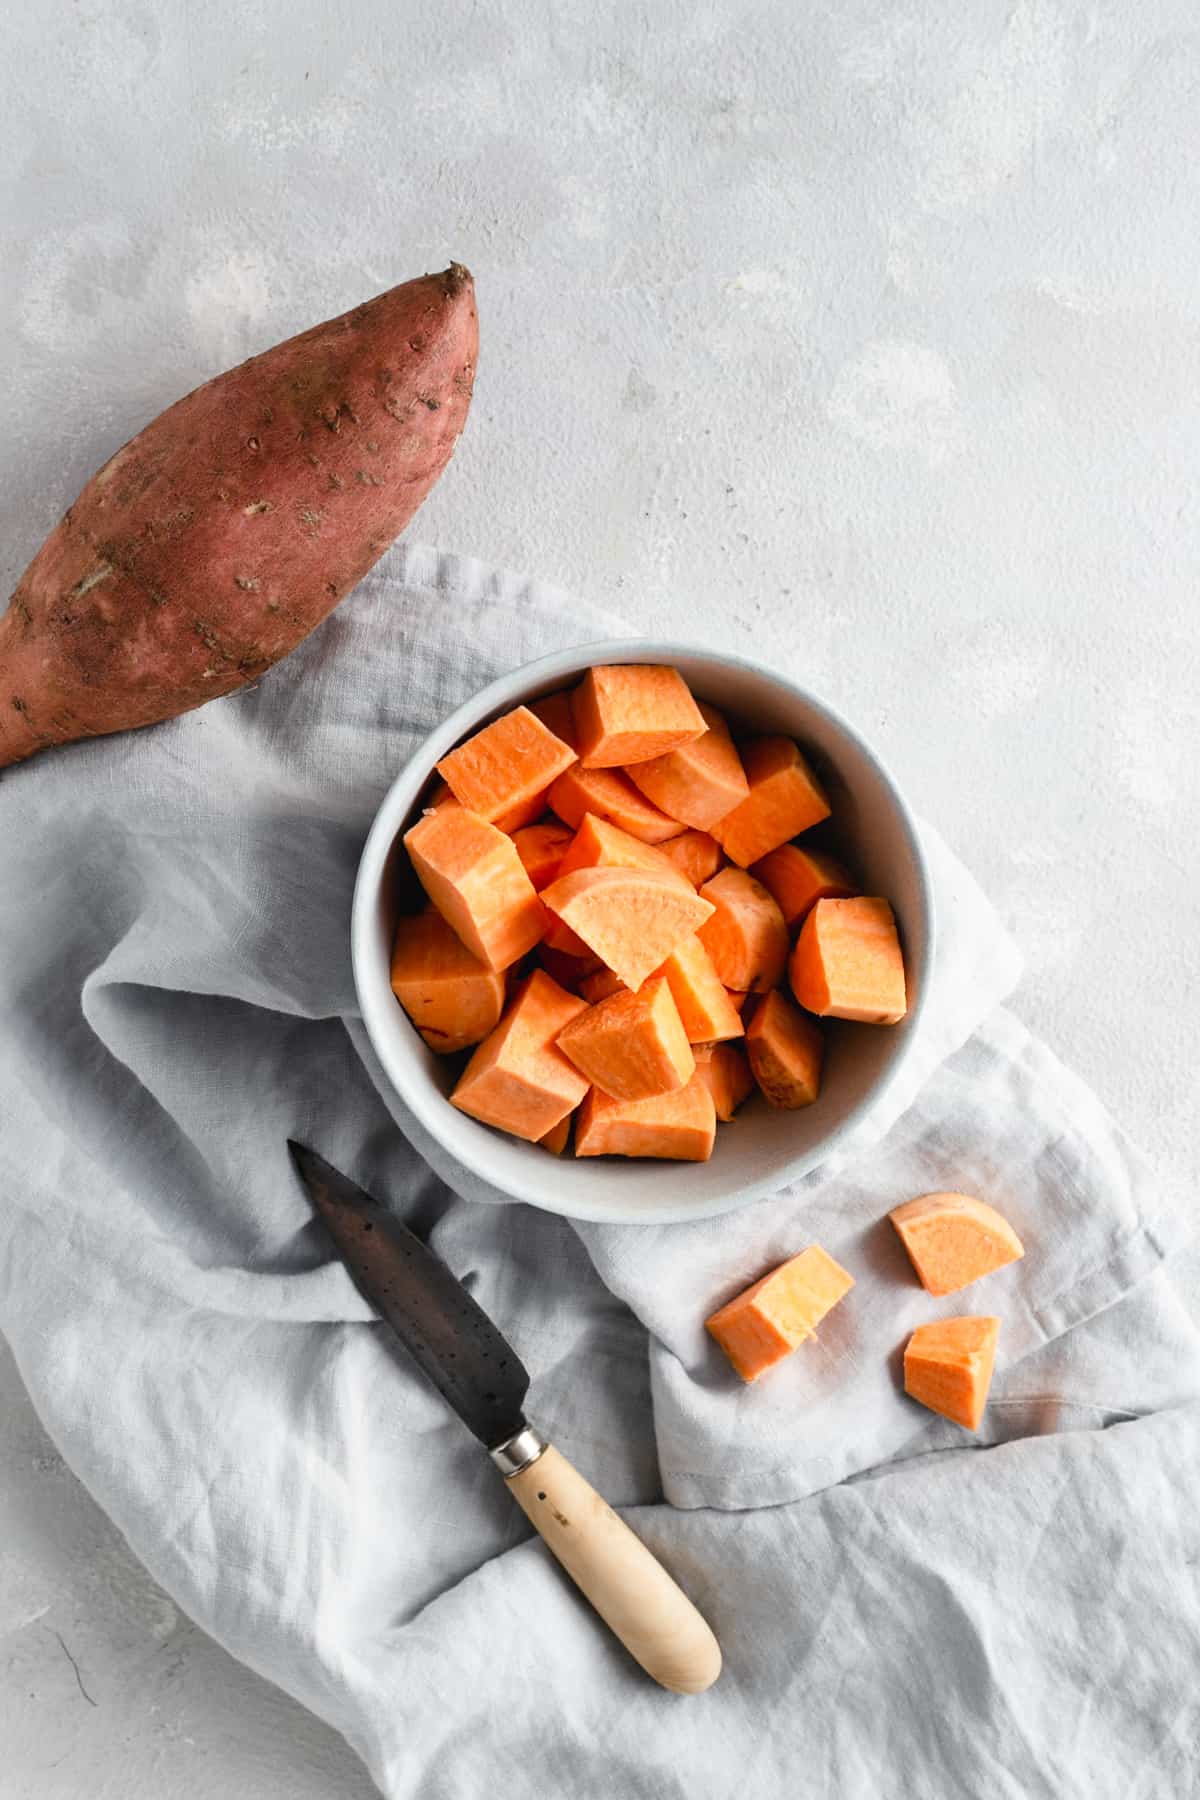 small bowl with chunks of sweet potato and a hand knife on side